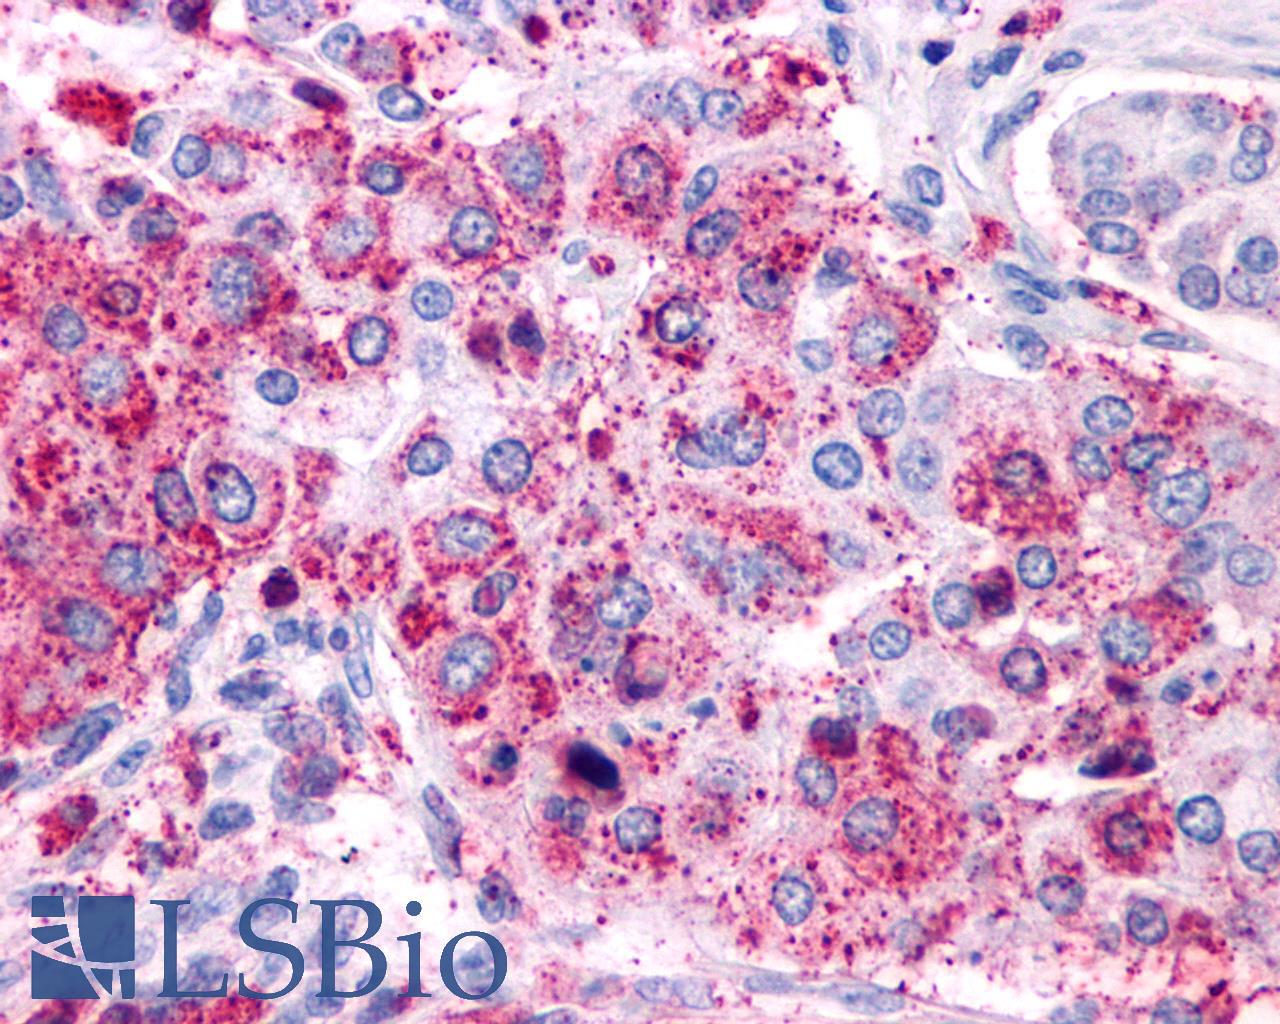 VIPR1 Antibody - Lung, non small-cell carcinoma